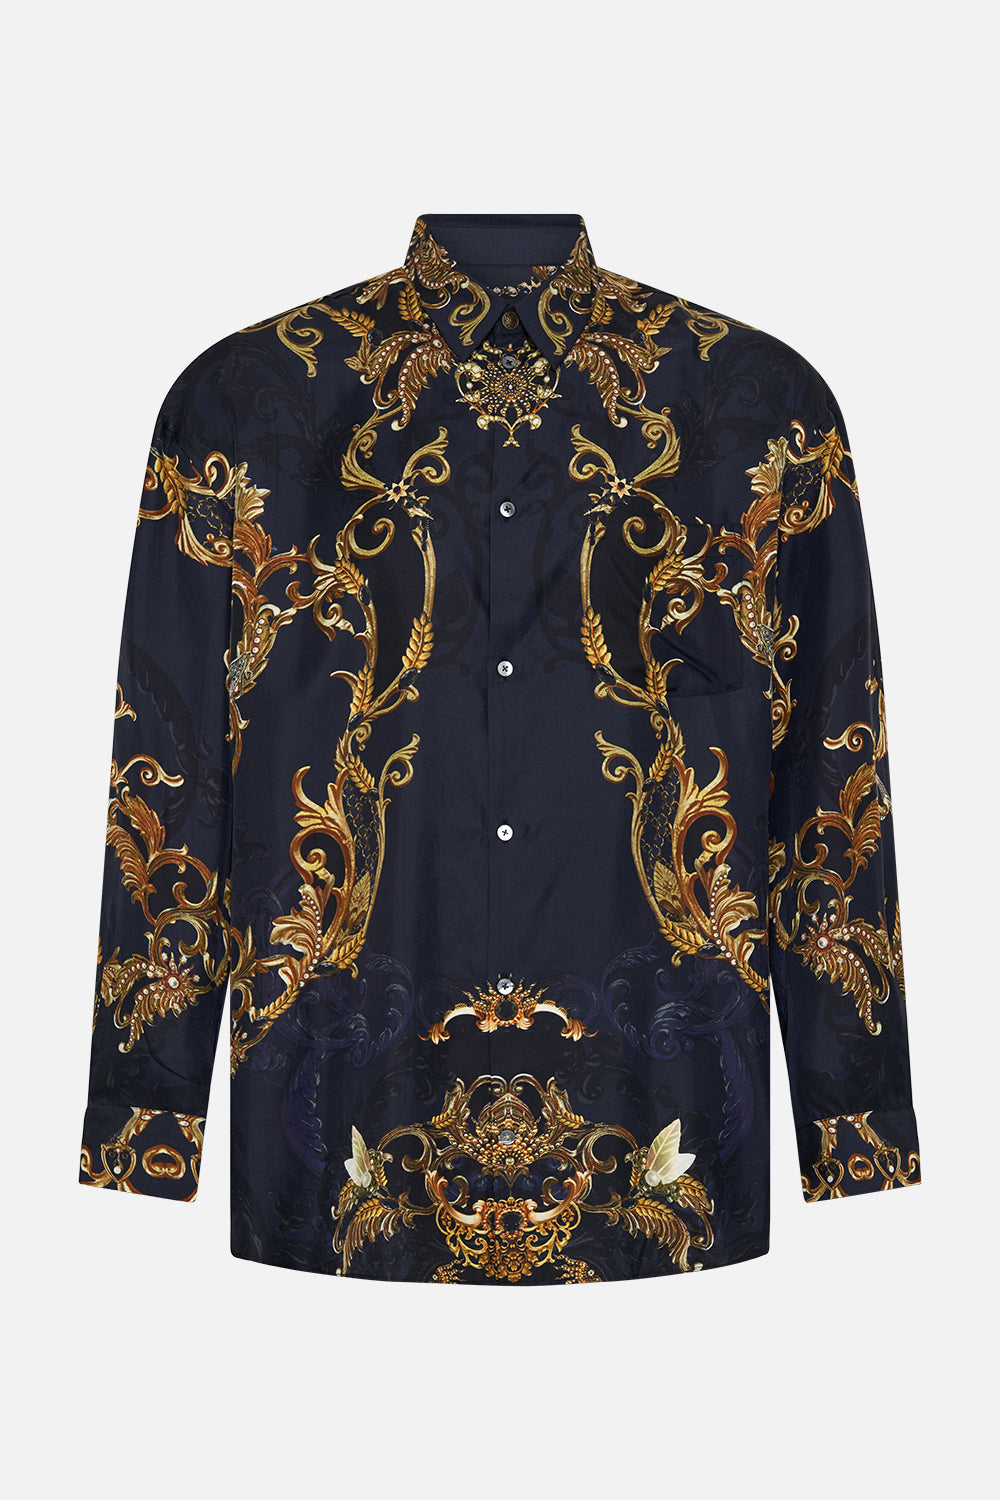 Product view of  Hotel Franks By CAMILLA mens oversized shirt in Moonlight Melodies print